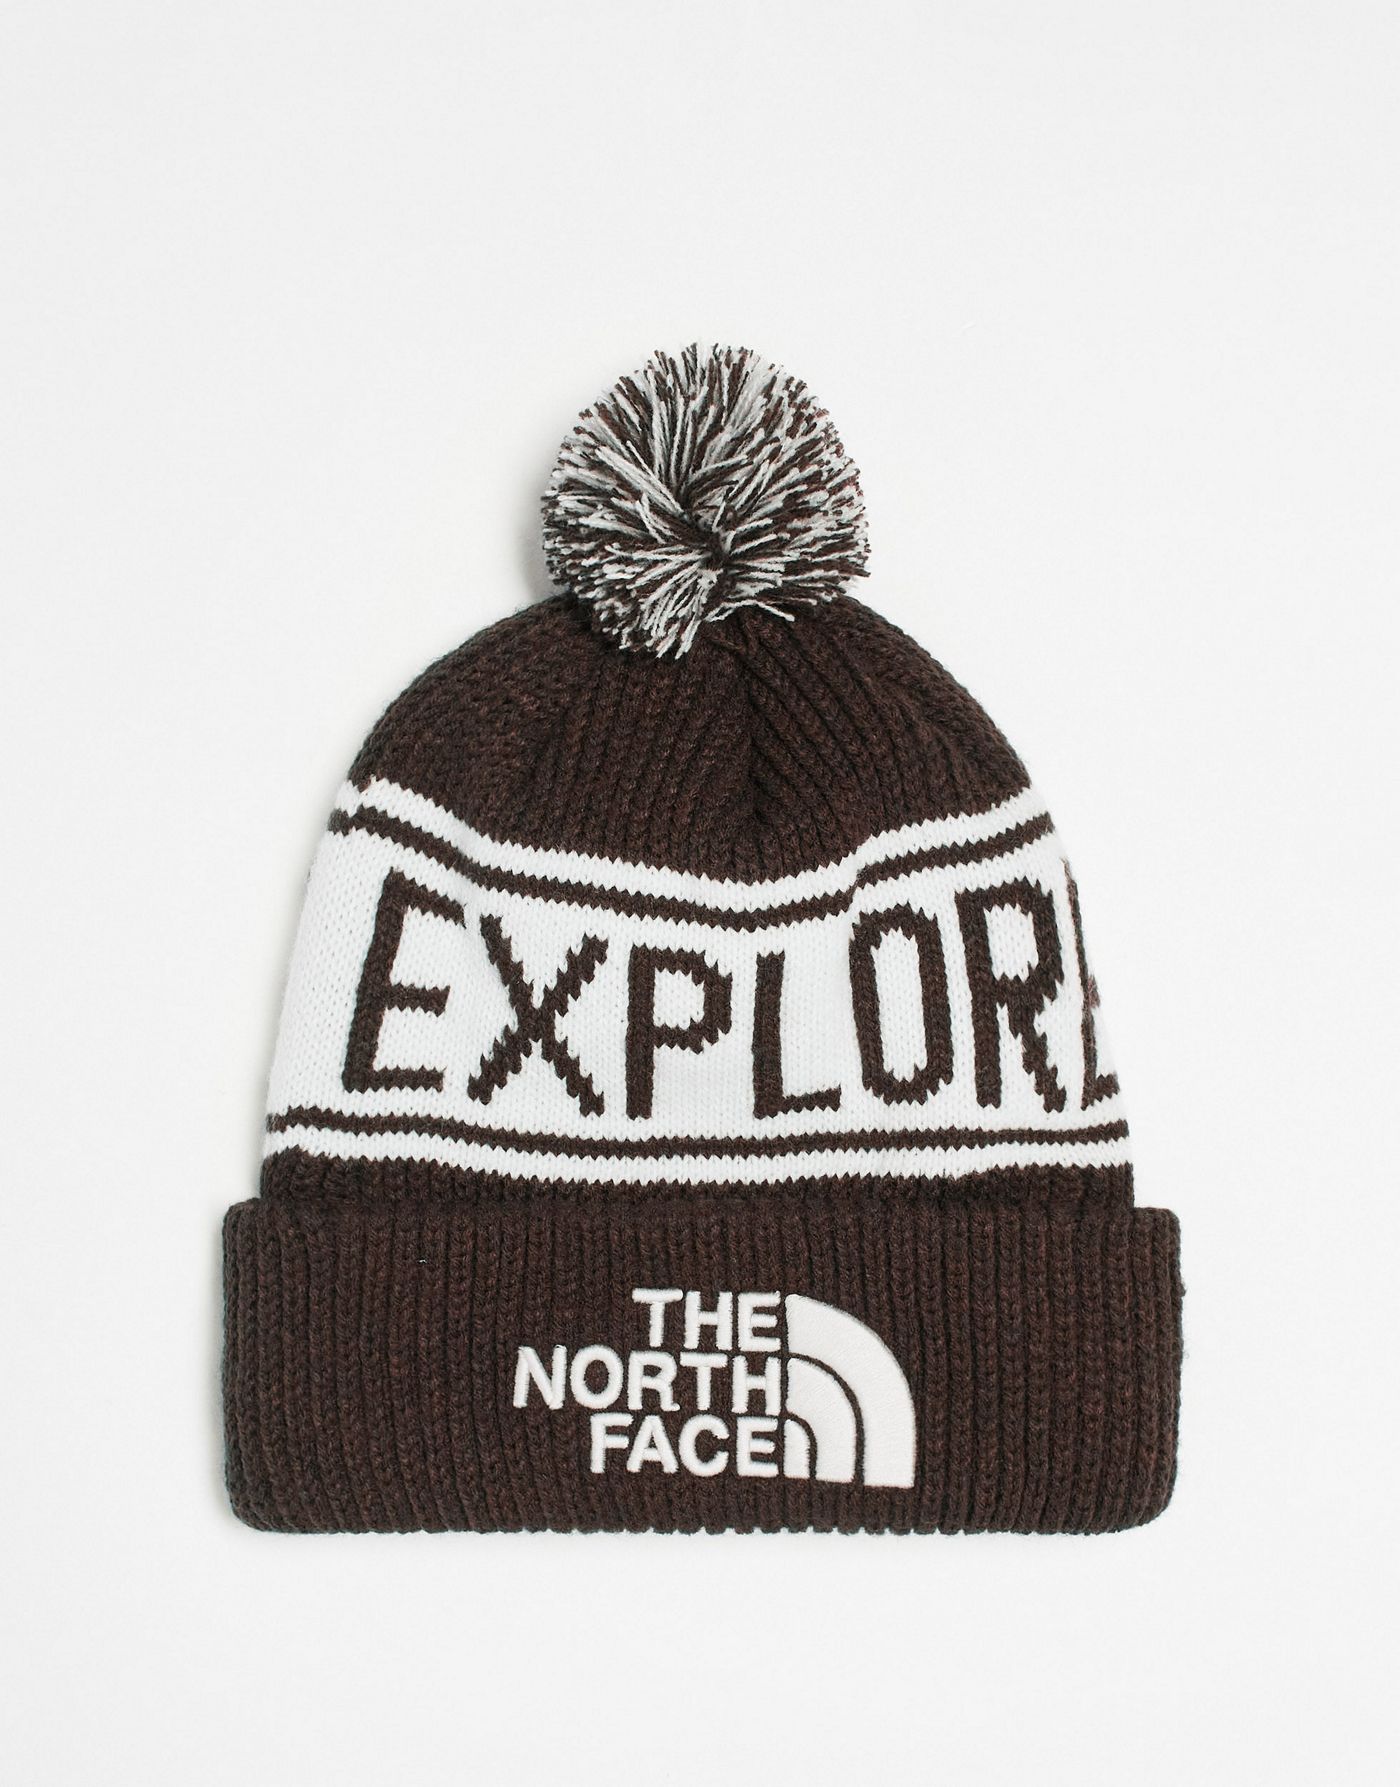 The North Face Retro bobble hat in brown and off white